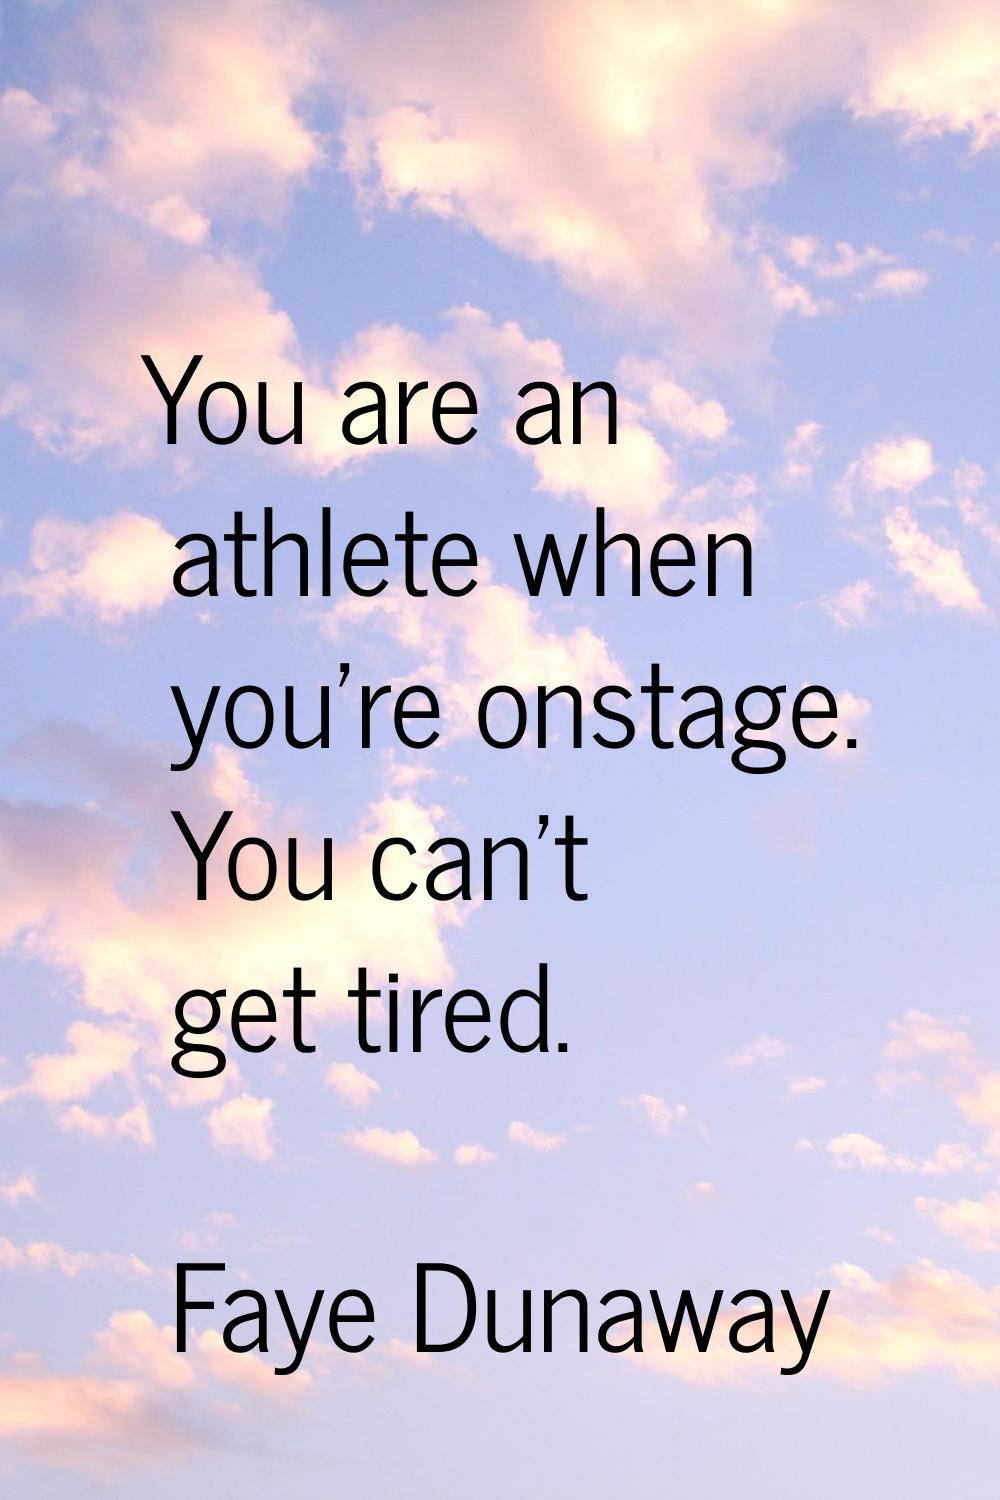 You are an athlete when you're onstage. You can't get tired.